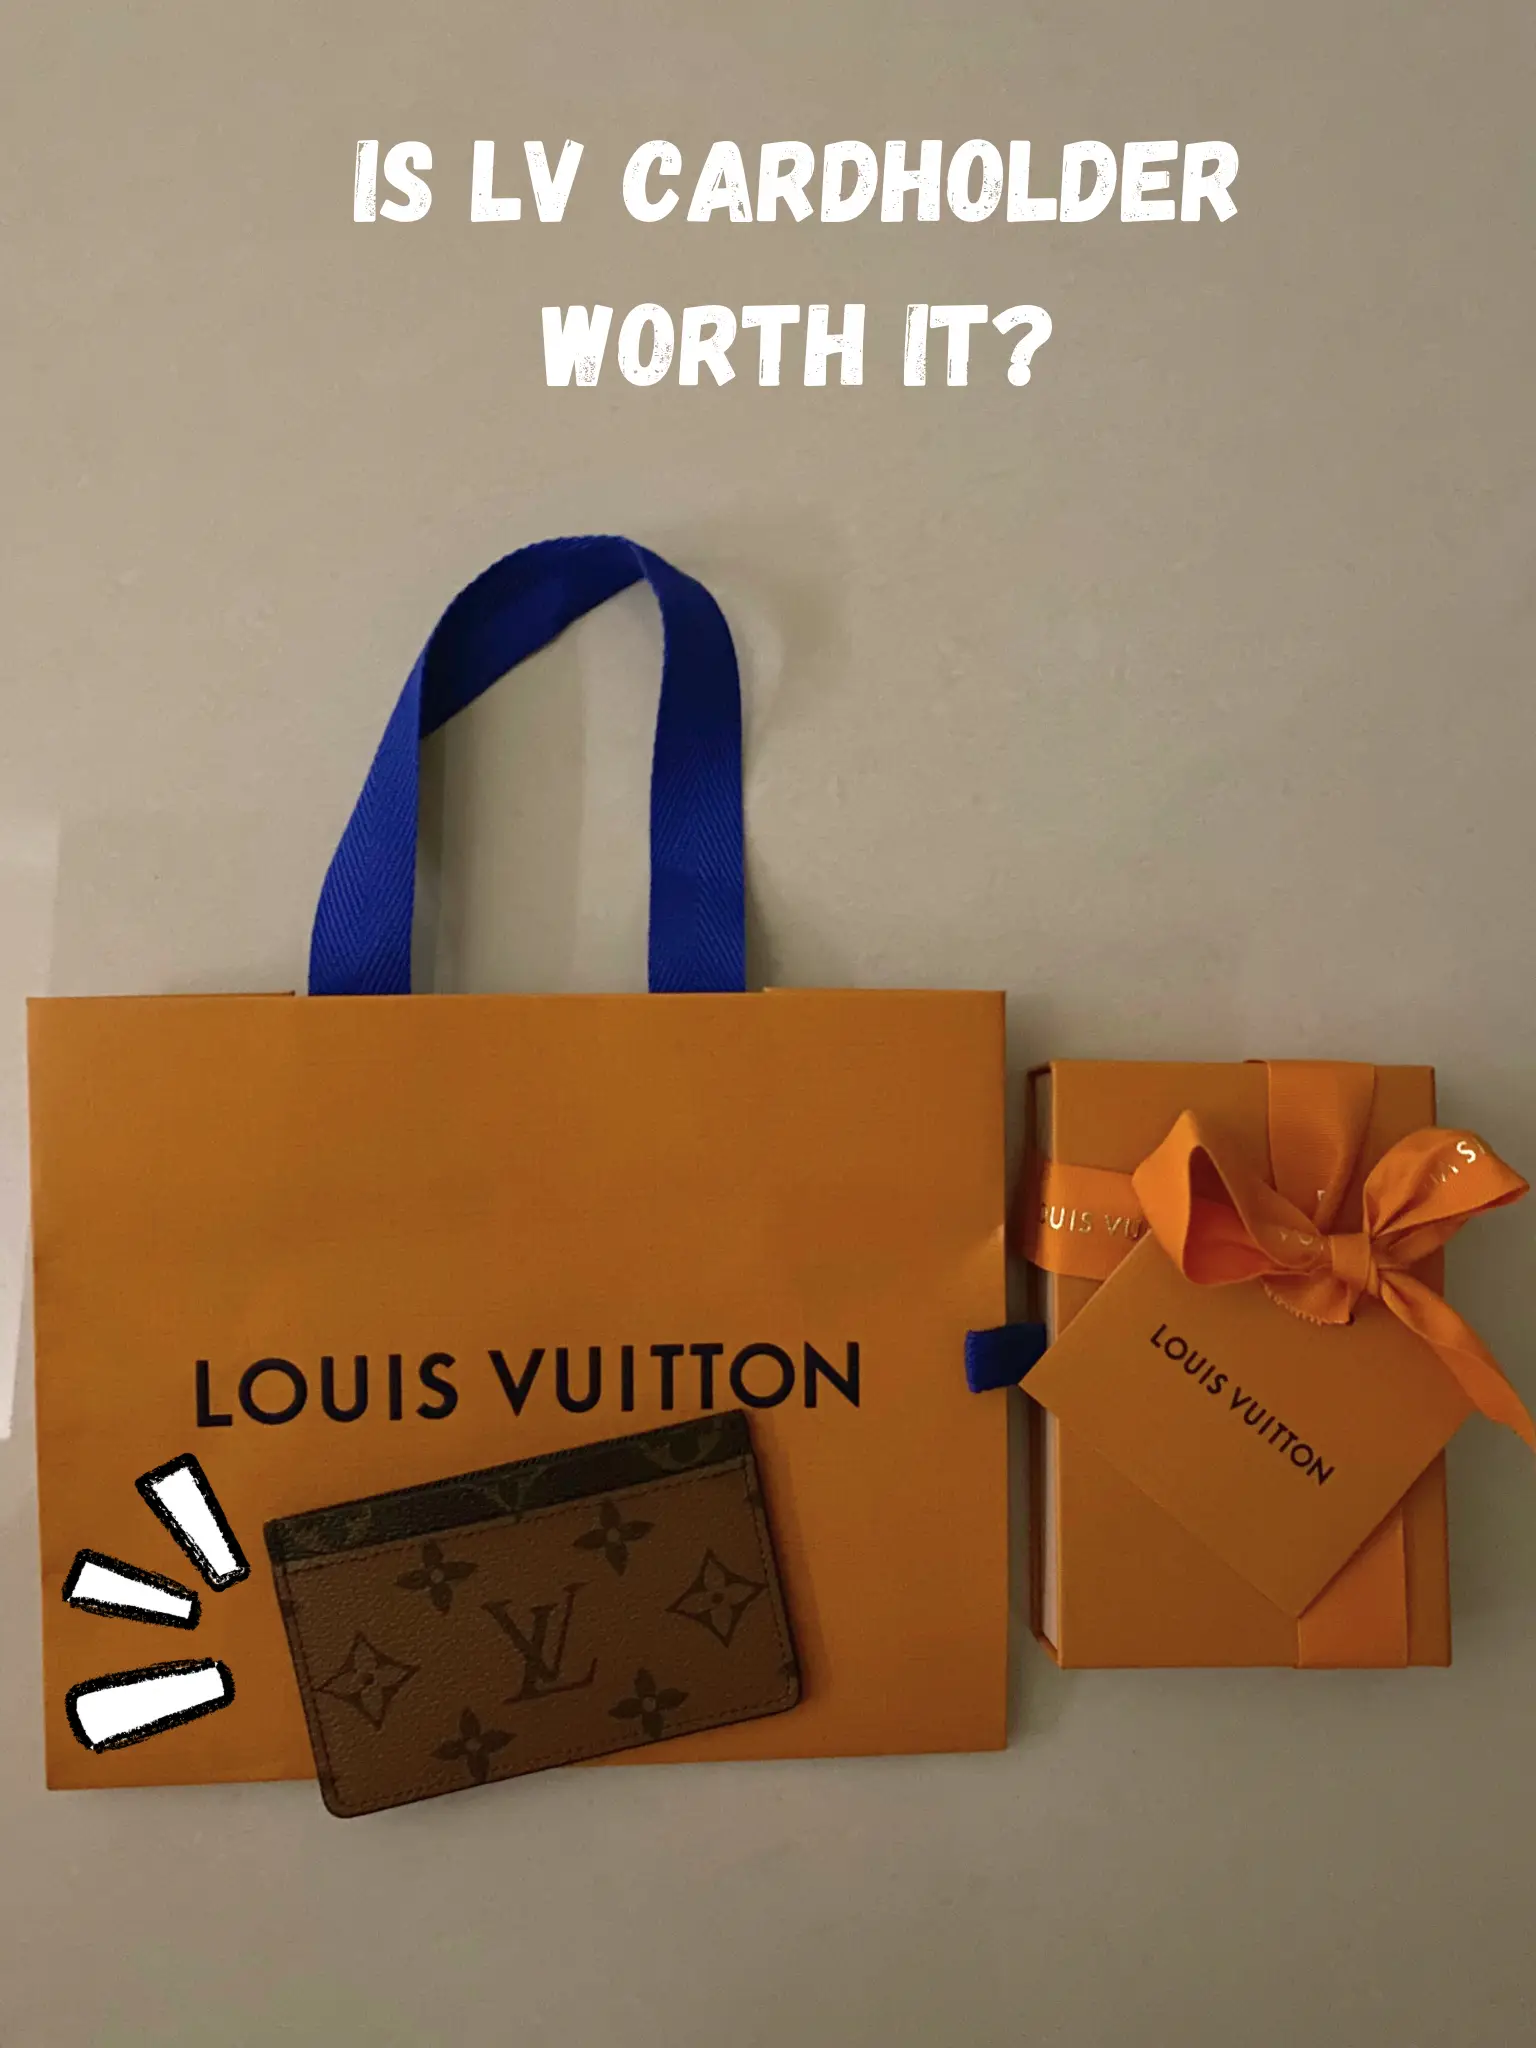 LOUIS VUITTON is MUCH cheaper in the UK!, Gallery posted by Felyn Tan